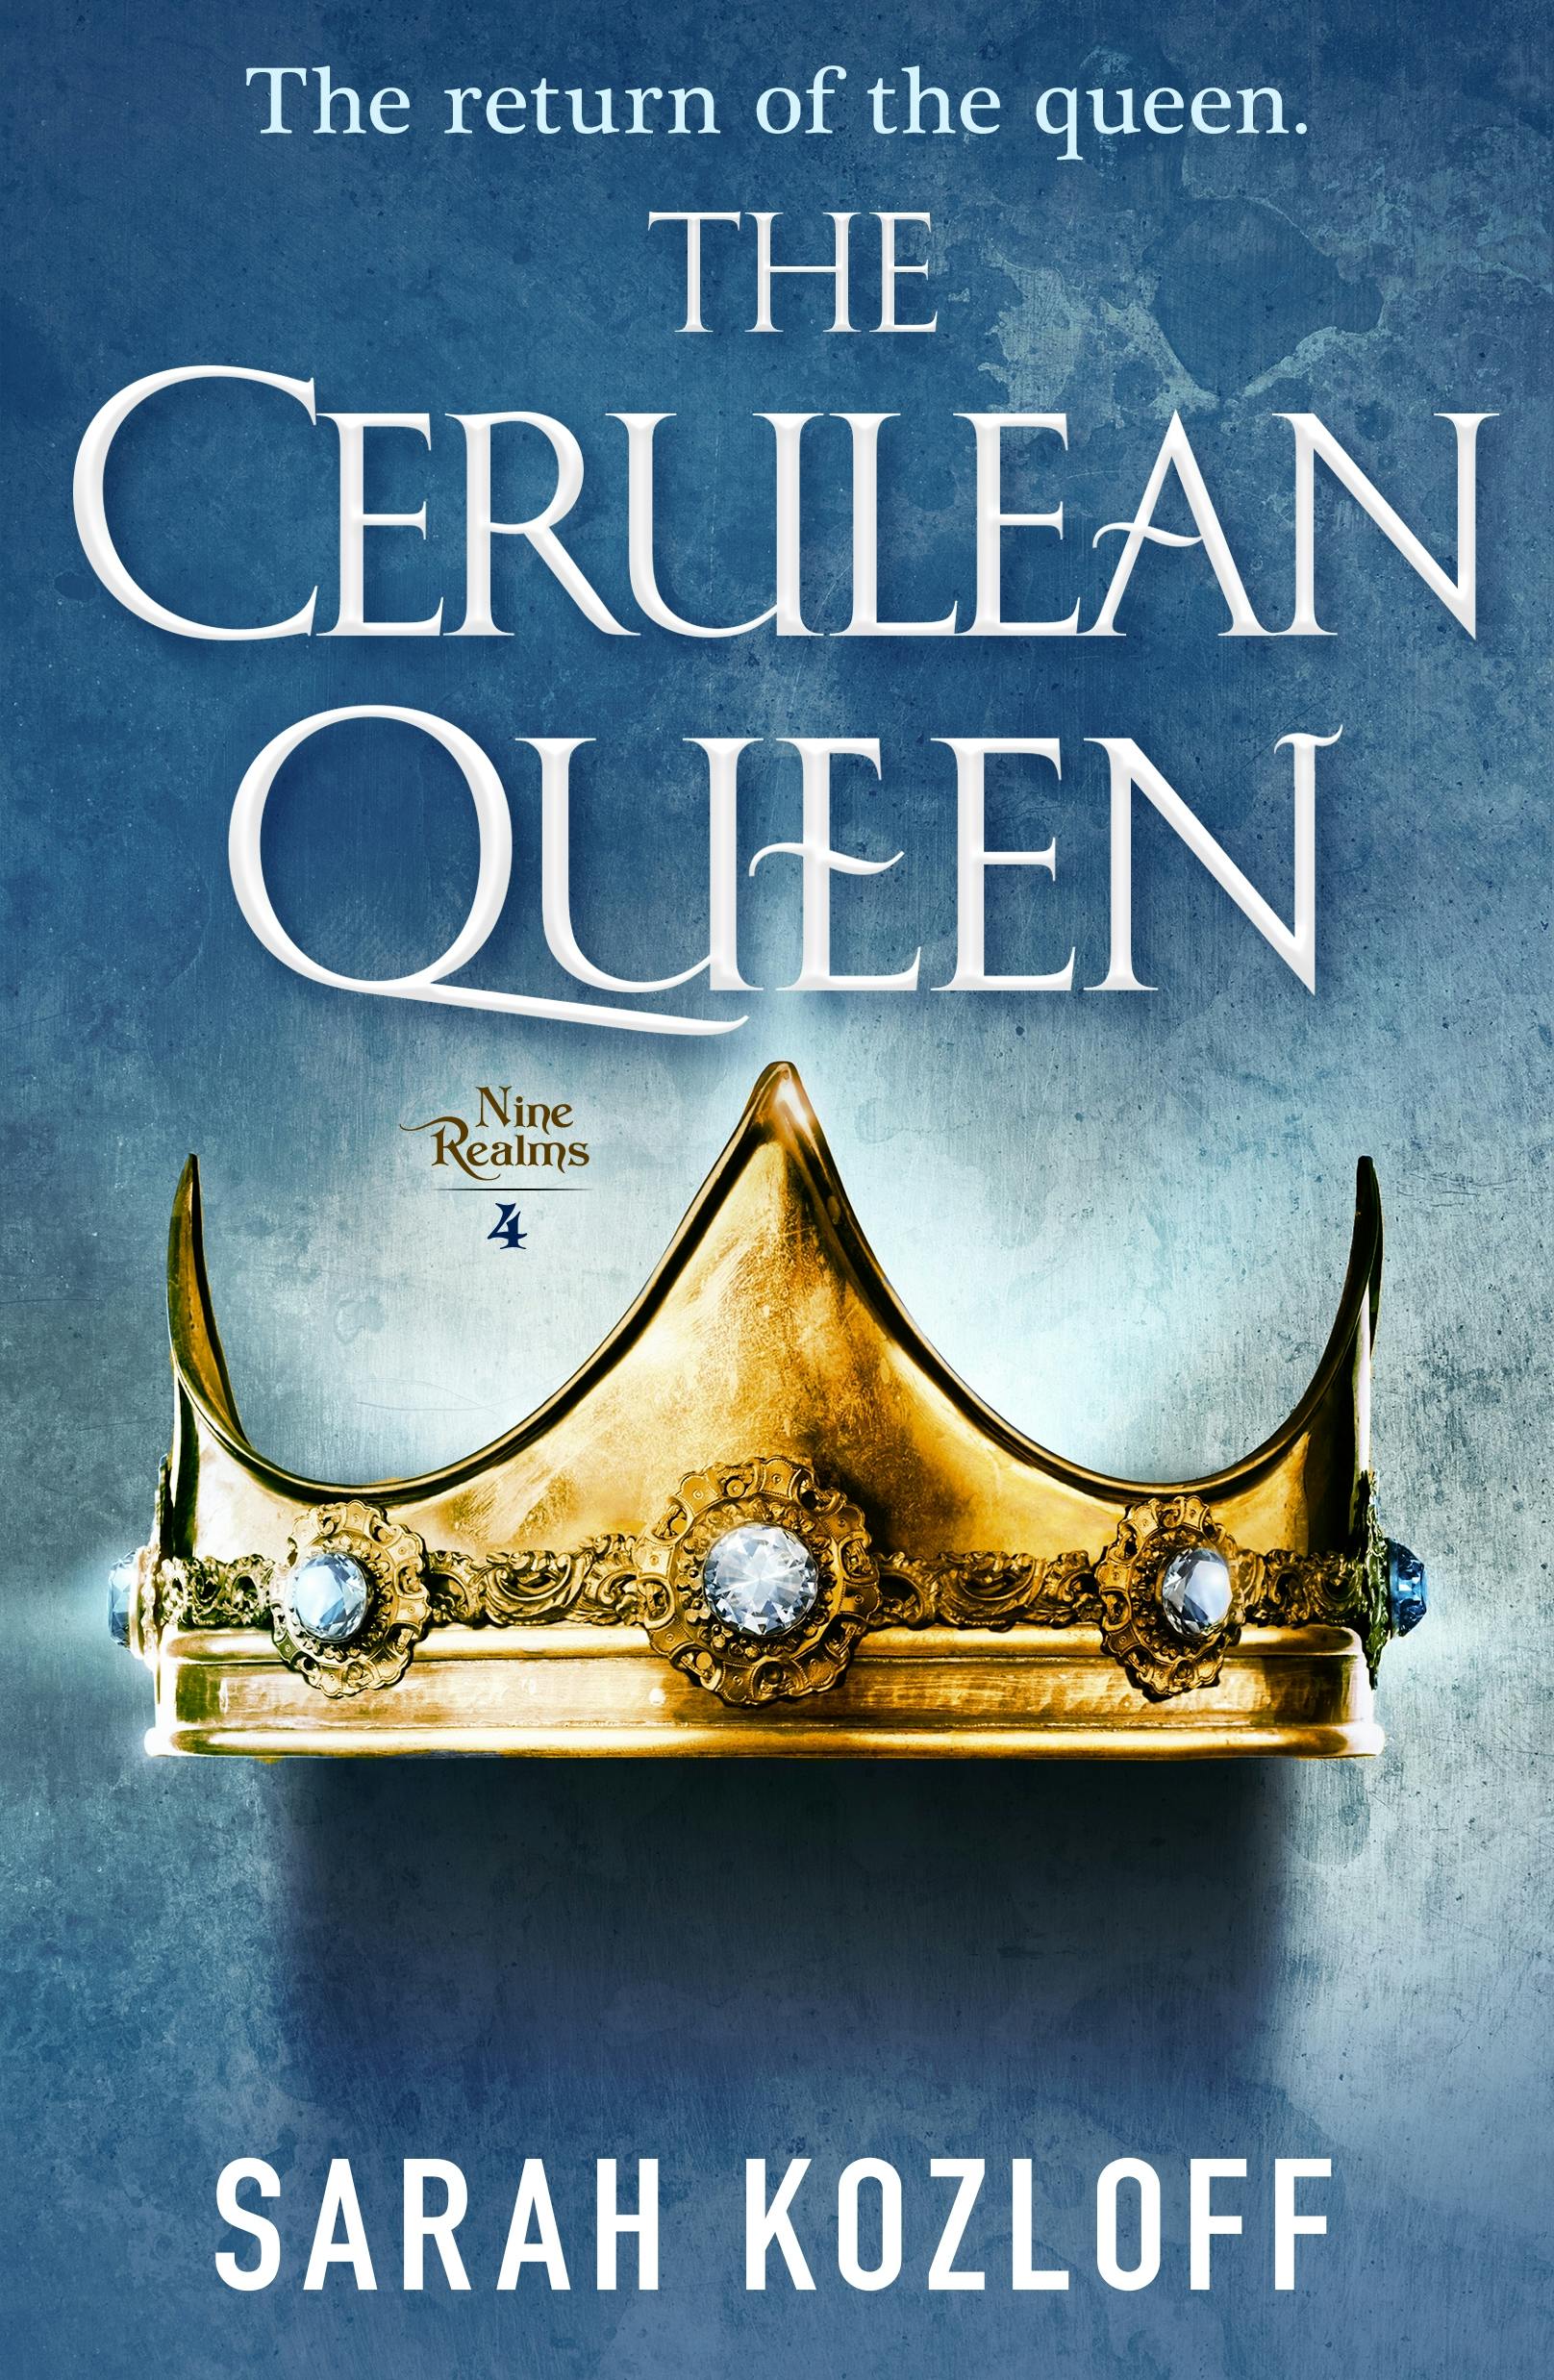 Cover for the book titled as: The Cerulean Queen